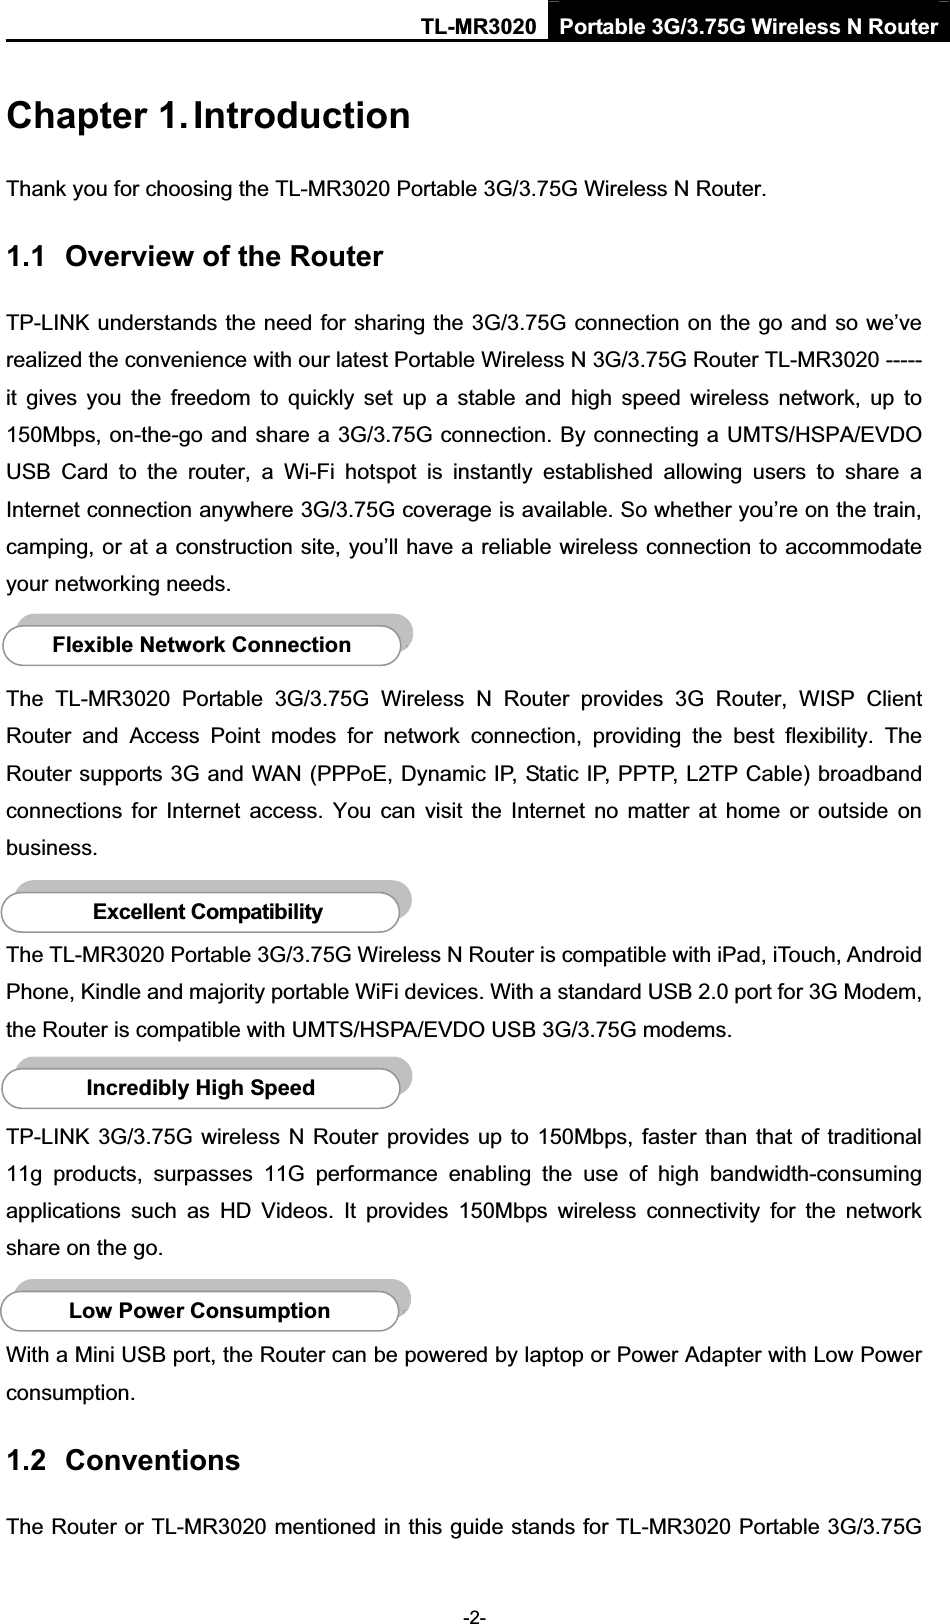 TL-MR3020 Portable 3G/3.75G Wireless N Router-2-Chapter 1. IntroductionThank you for choosing the TL-MR3020 Portable 3G/3.75G Wireless N Router. 1.1 Overview of the Router TP-LINK understands the need for sharing the 3G/3.75G connection on the go and so we’ve realized the convenience with our latest Portable Wireless N 3G/3.75G Router TL-MR3020 ----- it  gives  you  the  freedom  to  quickly  set  up  a  stable  and  high  speed  wireless  network,  up  to 150Mbps, on-the-go and share a 3G/3.75G connection. By connecting a UMTS/HSPA/EVDO USB  Card  to  the  router,  a  Wi-Fi  hotspot  is  instantly  established  allowing  users  to  share  a Internet connection anywhere 3G/3.75G coverage is available. So whether you’re on the train, camping, or at a construction site, you’ll have a reliable wireless connection to accommodate your networking needs. The  TL-MR3020  Portable  3G/3.75G  Wireless  N  Router  provides  3G  Router,  WISP  Client Router  and  Access  Point  modes  for  network  connection,  providing  the  best  flexibility.  The Router supports 3G and WAN (PPPoE, Dynamic IP, Static IP, PPTP, L2TP Cable) broadband connections  for  Internet  access.  You  can  visit  the  Internet  no  matter  at  home  or  outside  on business.The TL-MR3020 Portable 3G/3.75G Wireless N Router is compatible with iPad, iTouch, Android Phone, Kindle and majority portable WiFi devices. With a standard USB 2.0 port for 3G Modem, the Router is compatible with UMTS/HSPA/EVDO USB 3G/3.75G modems. TP-LINK 3G/3.75G wireless N Router provides  up to 150Mbps, faster than that of traditional 11g  products,  surpasses  11G  performance  enabling  the  use  of  high  bandwidth-consuming applications  such  as  HD  Videos.  It  provides  150Mbps  wireless  connectivity  for  the  network share on the go. With a Mini USB port, the Router can be powered by laptop or Power Adapter with Low Power consumption.1.2 ConventionsThe Router or TL-MR3020 mentioned in this guide stands for TL-MR3020 Portable 3G/3.75G Low Power Consumption Incredibly High SpeedFlexible Network ConnectionExcellent Compatibility 